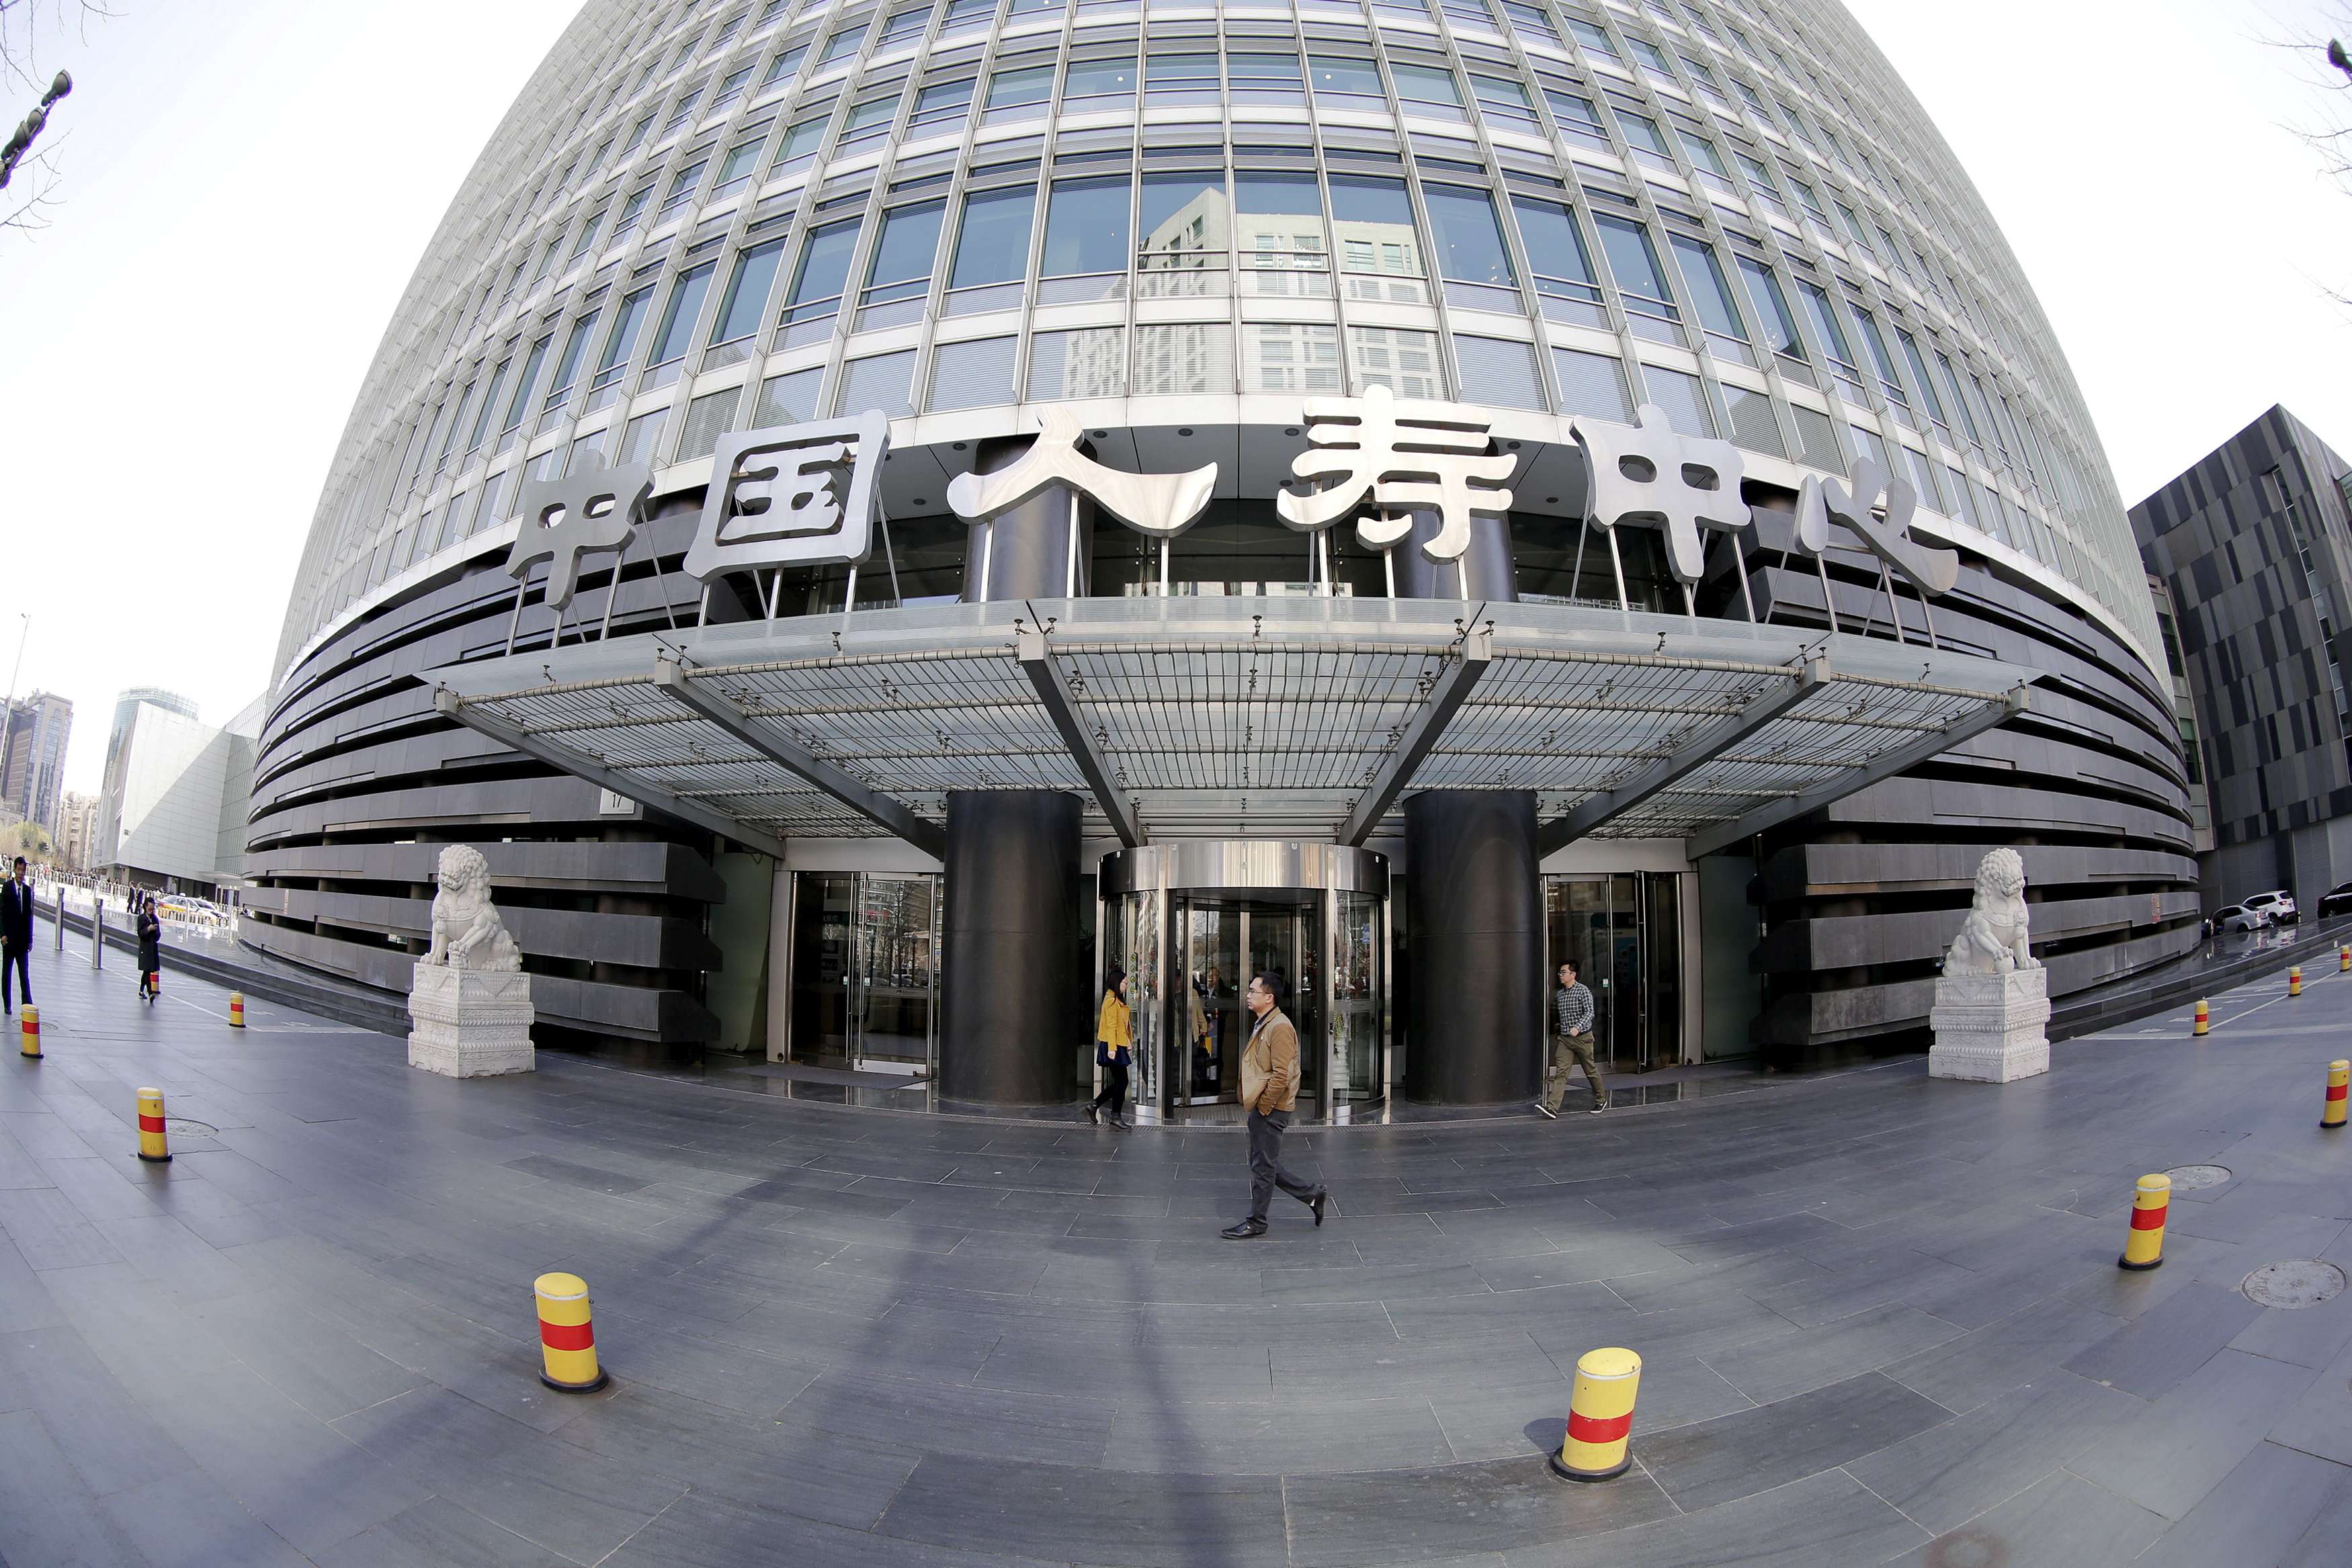 China Life Insurance has seen its A shares rise more than 10 per cent in the first two days of this week. Photo: Reuters